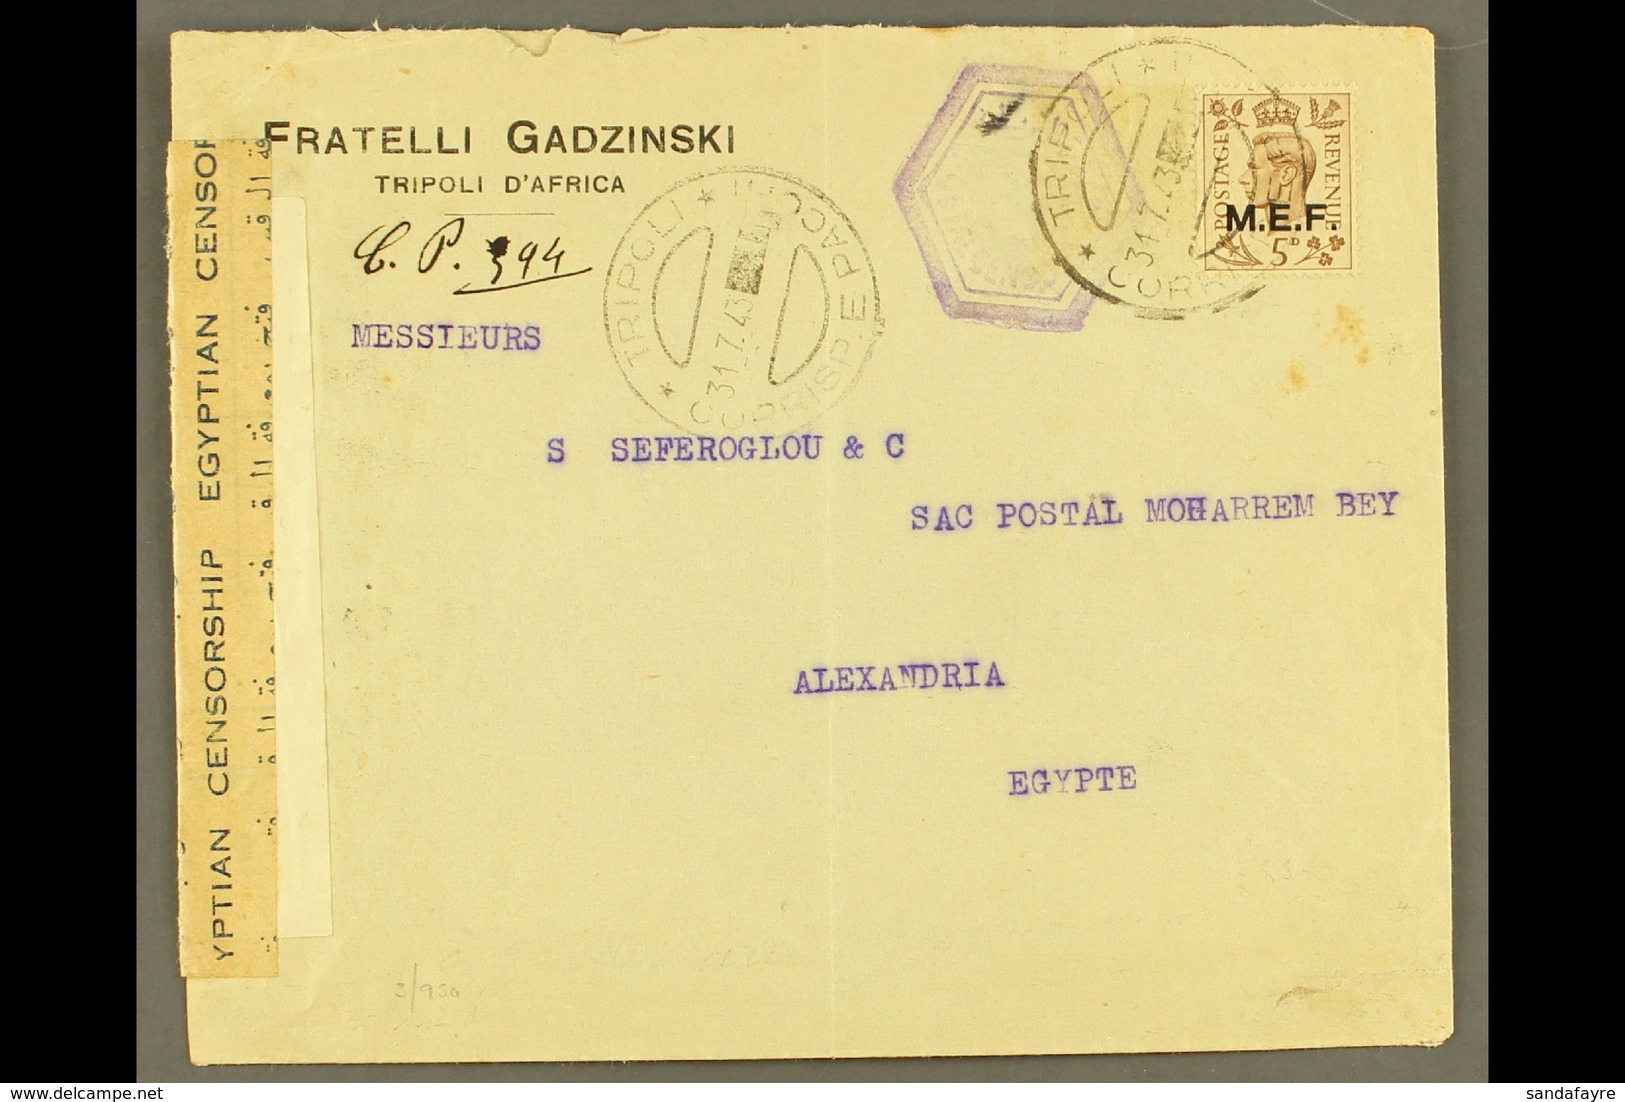 TRIPOLI 1943 Censored Commercial Cover To Egypt, Franked With KGVI 5d "M.E.F." Ovpt, Clear Tripoli 31.7.43 C.d.s. Postma - Italiaans Oost-Afrika